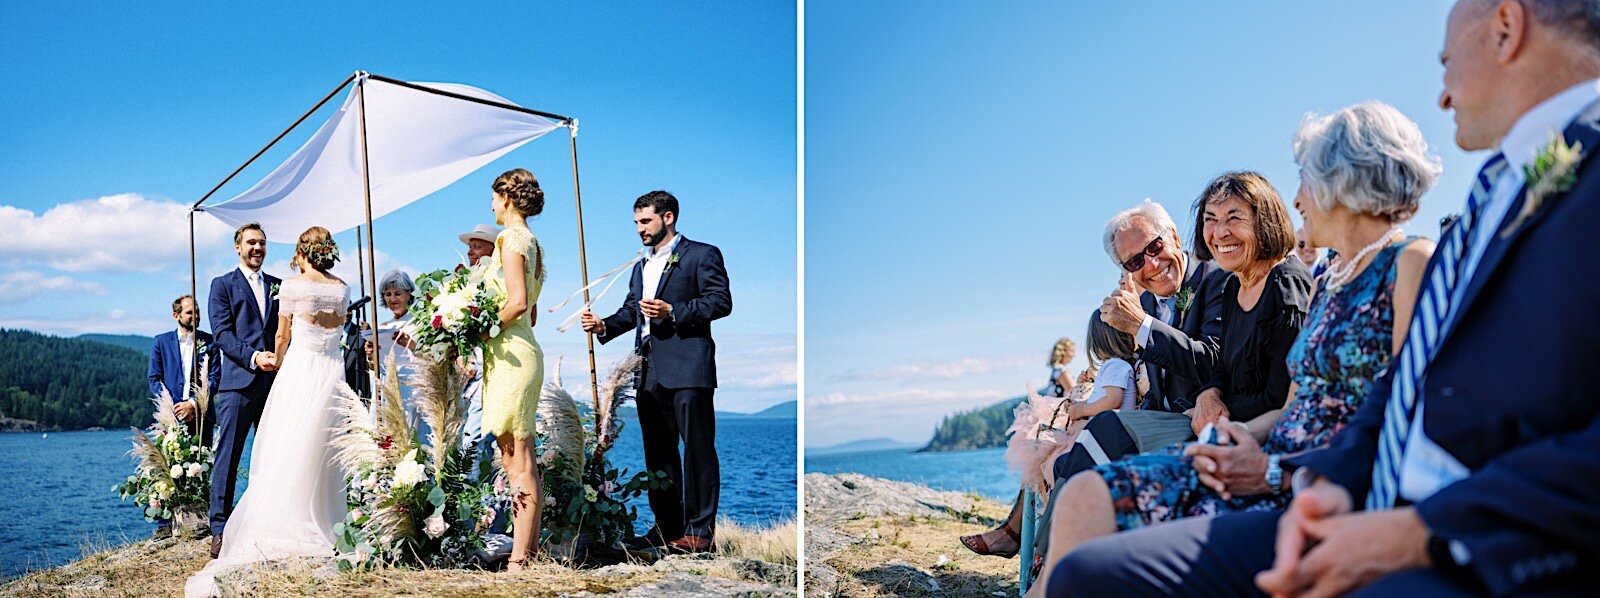 35_Island_private_a_cliff_Orcas_ceremony_Water_On_Outdoor_Intimate_Wedding_Over_the.jpg